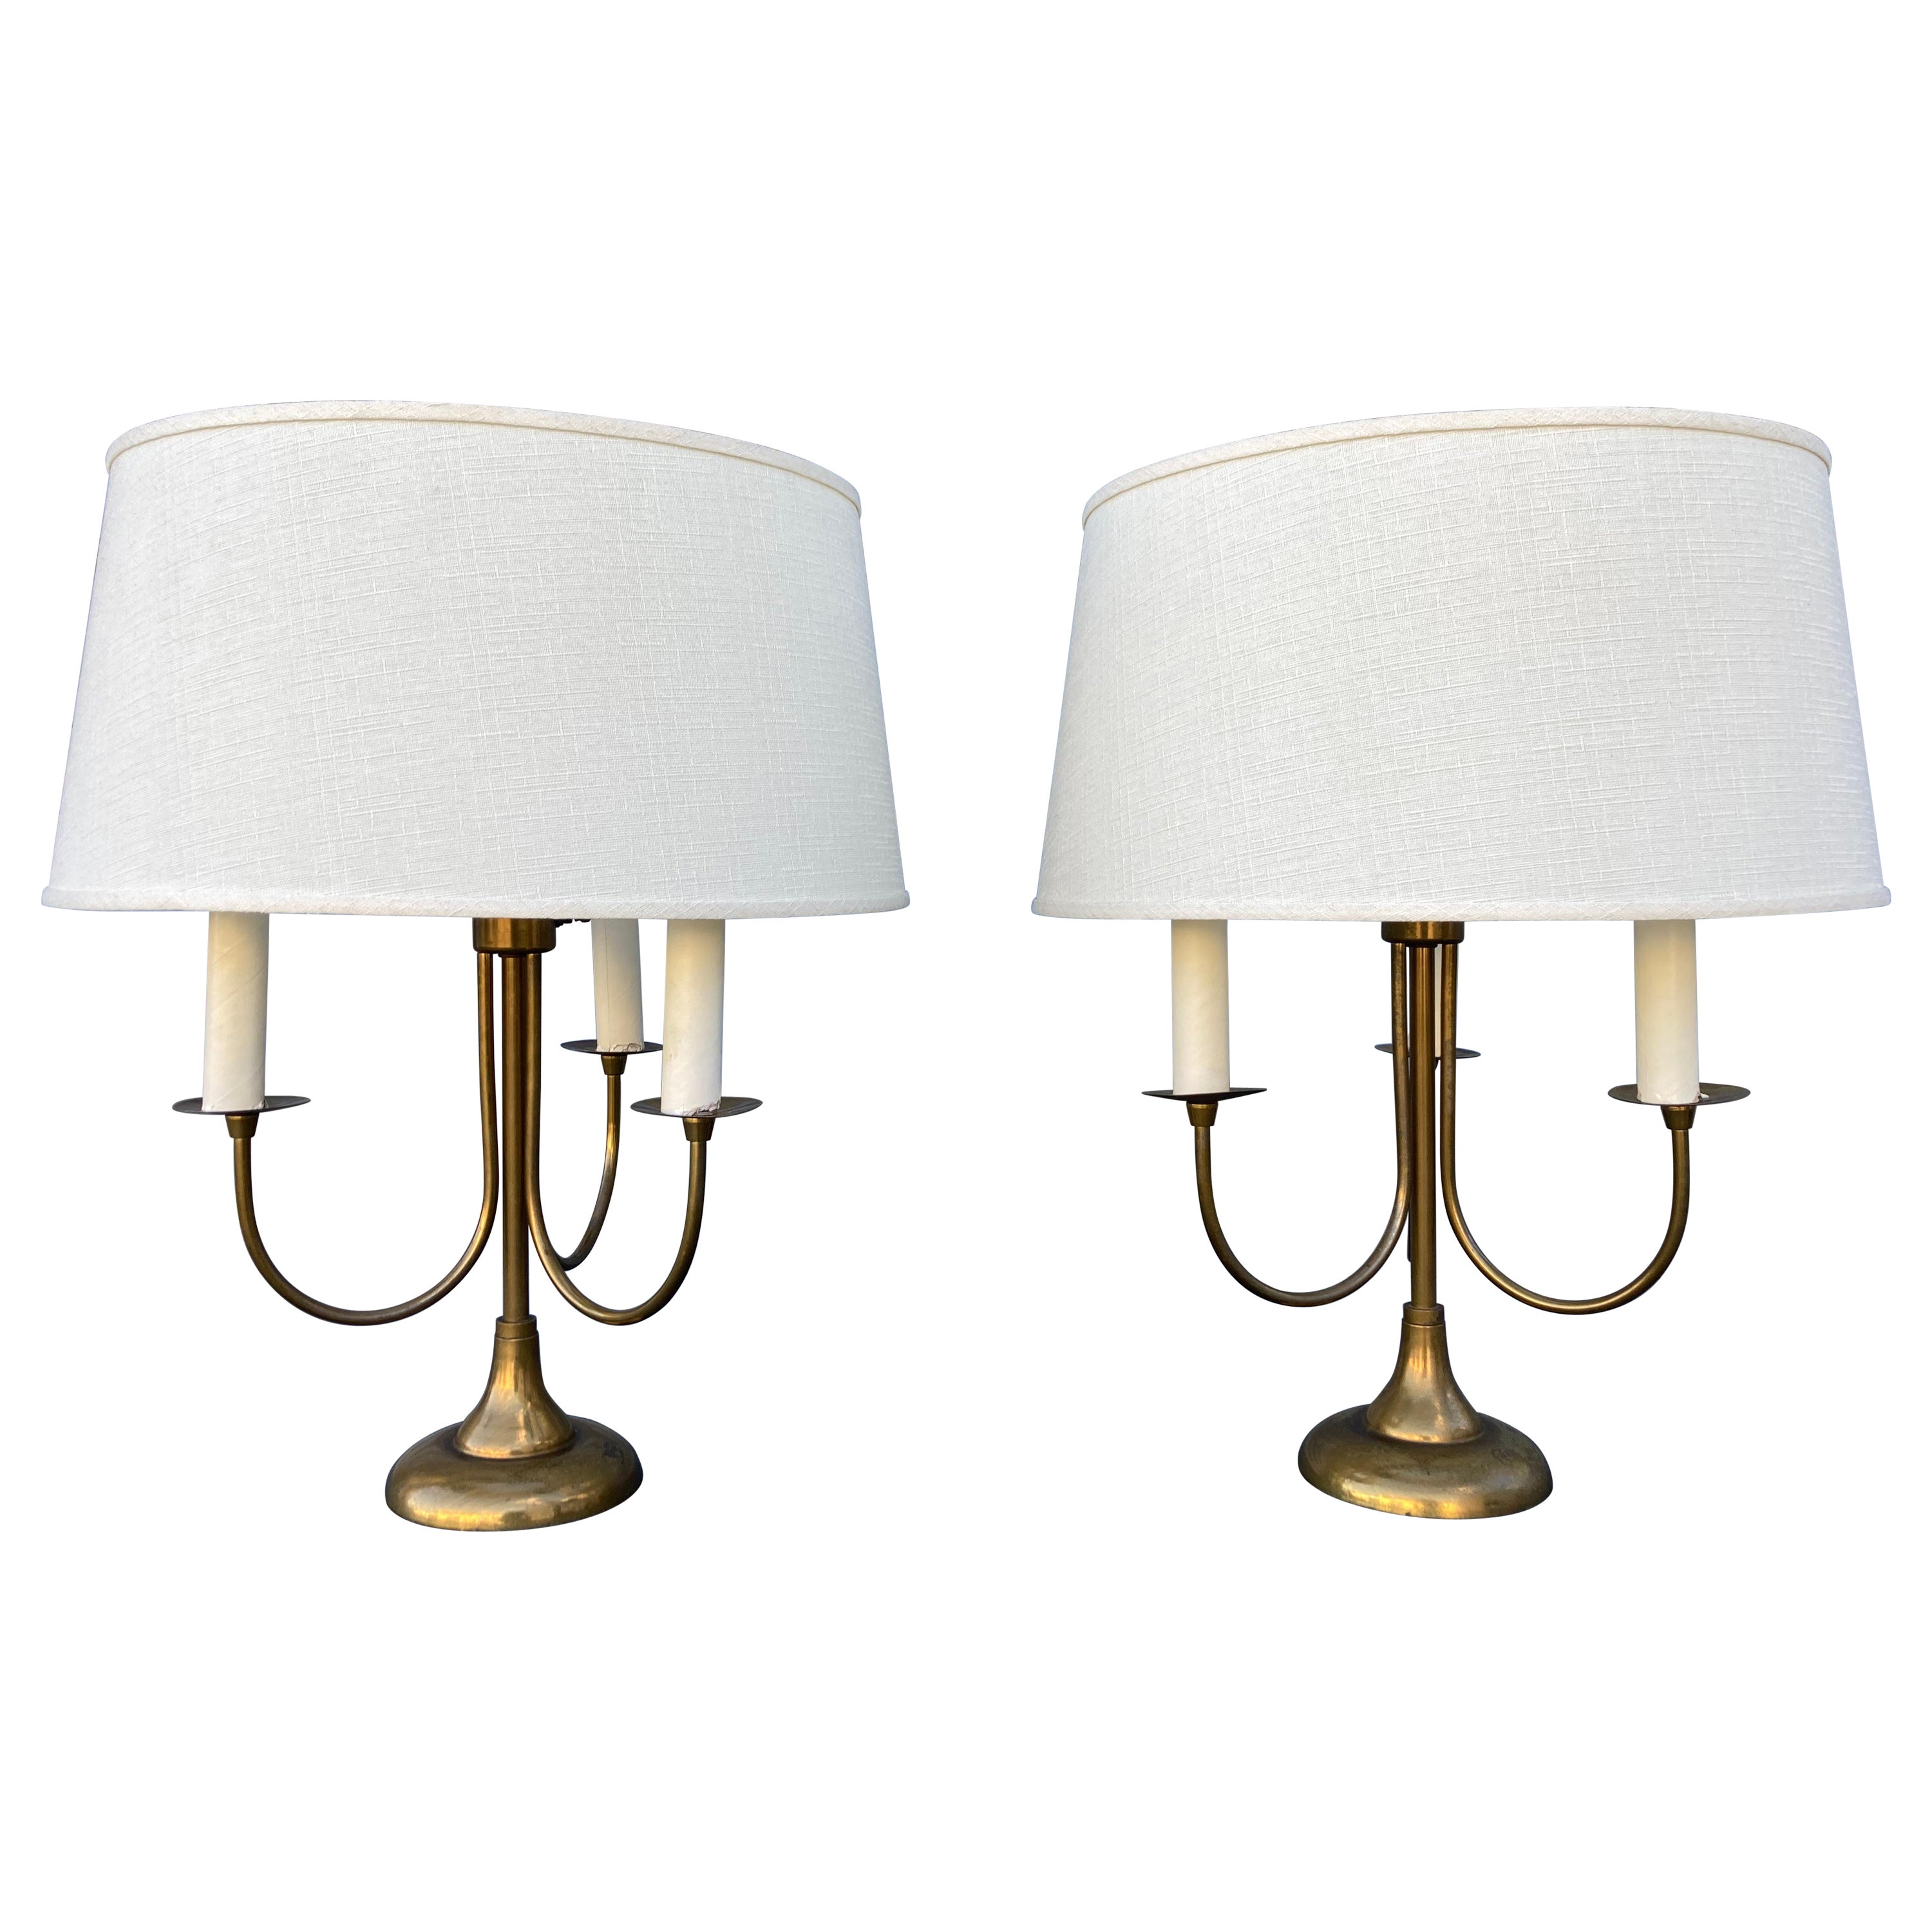 Pair of Mid-Century Modern Table Lamps, Brass, USA, 1950s For Sale